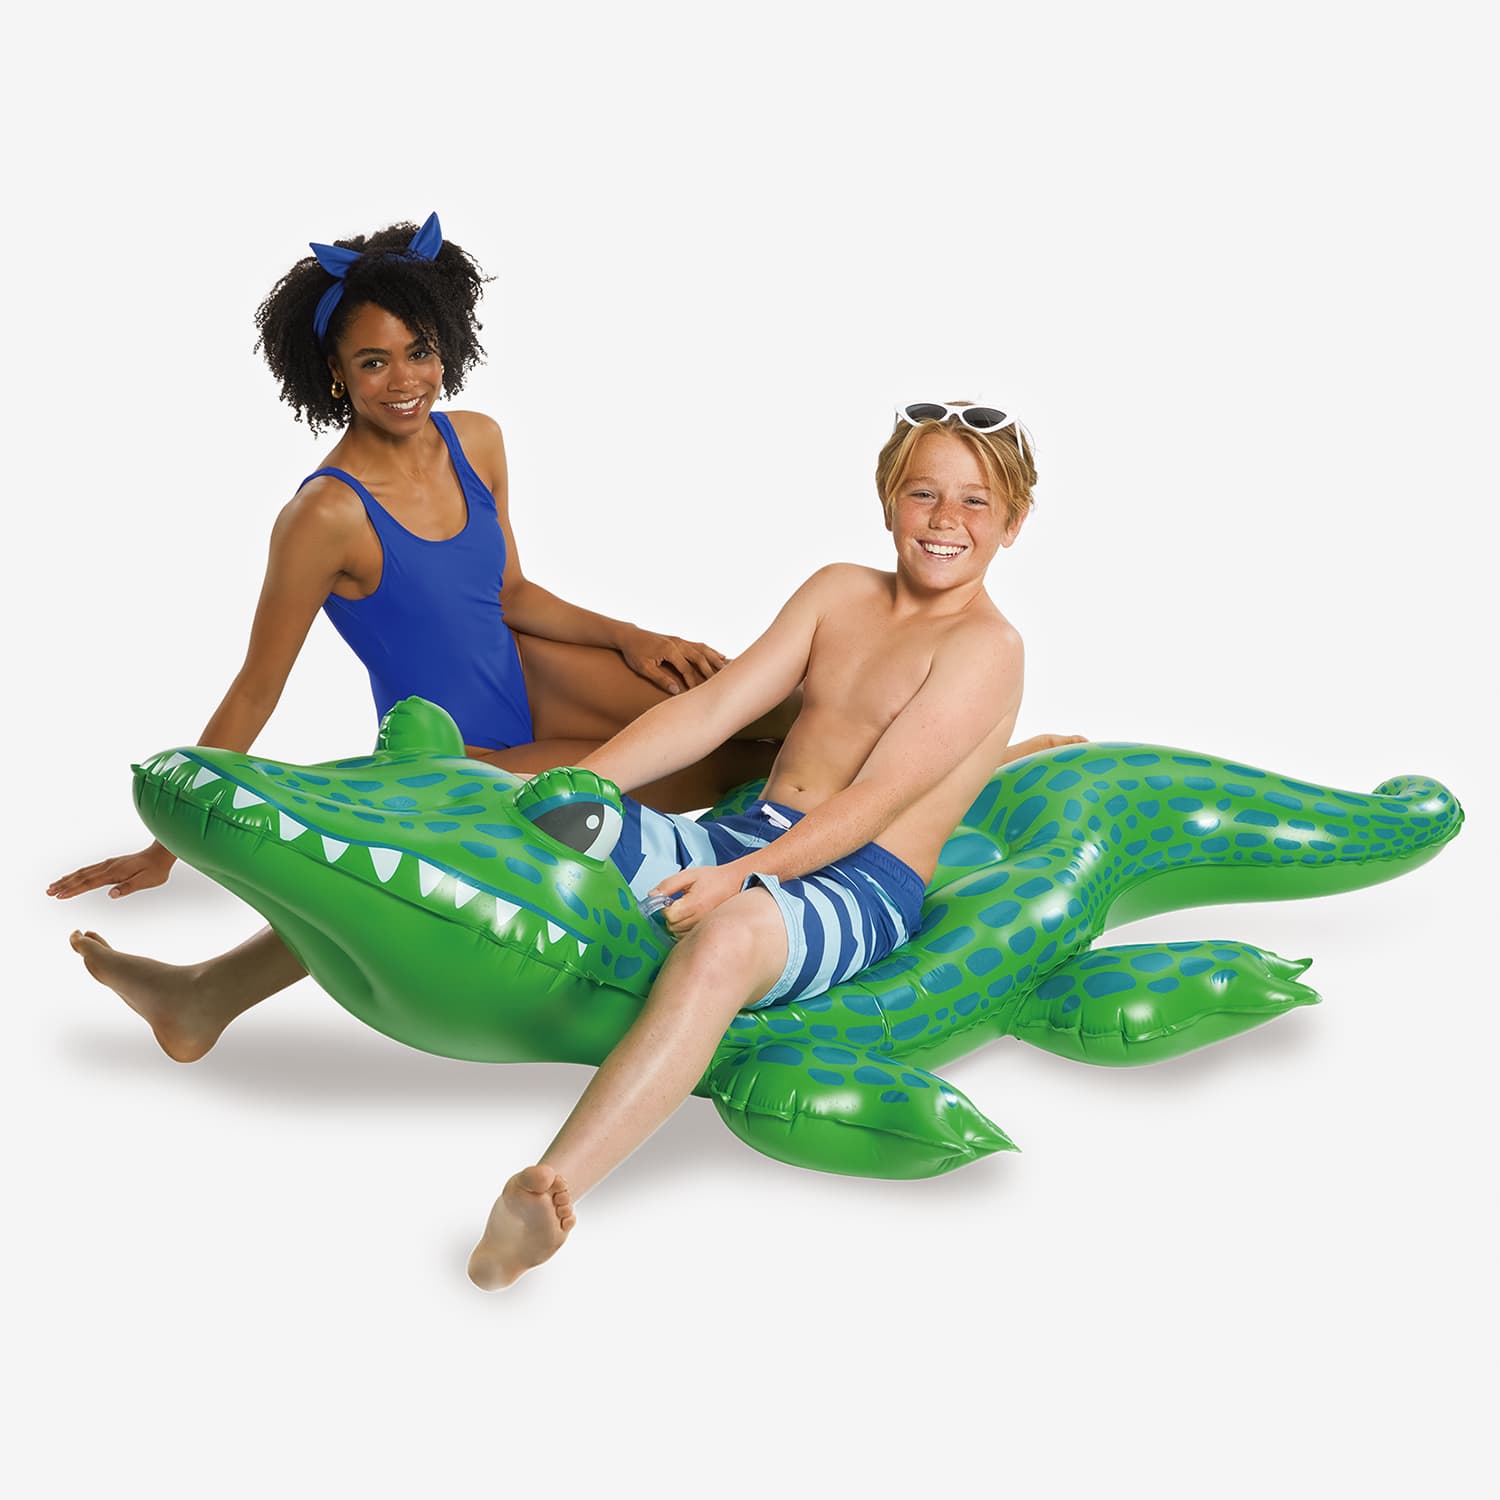 Funsicle Hungry Gator Ride-On with two models